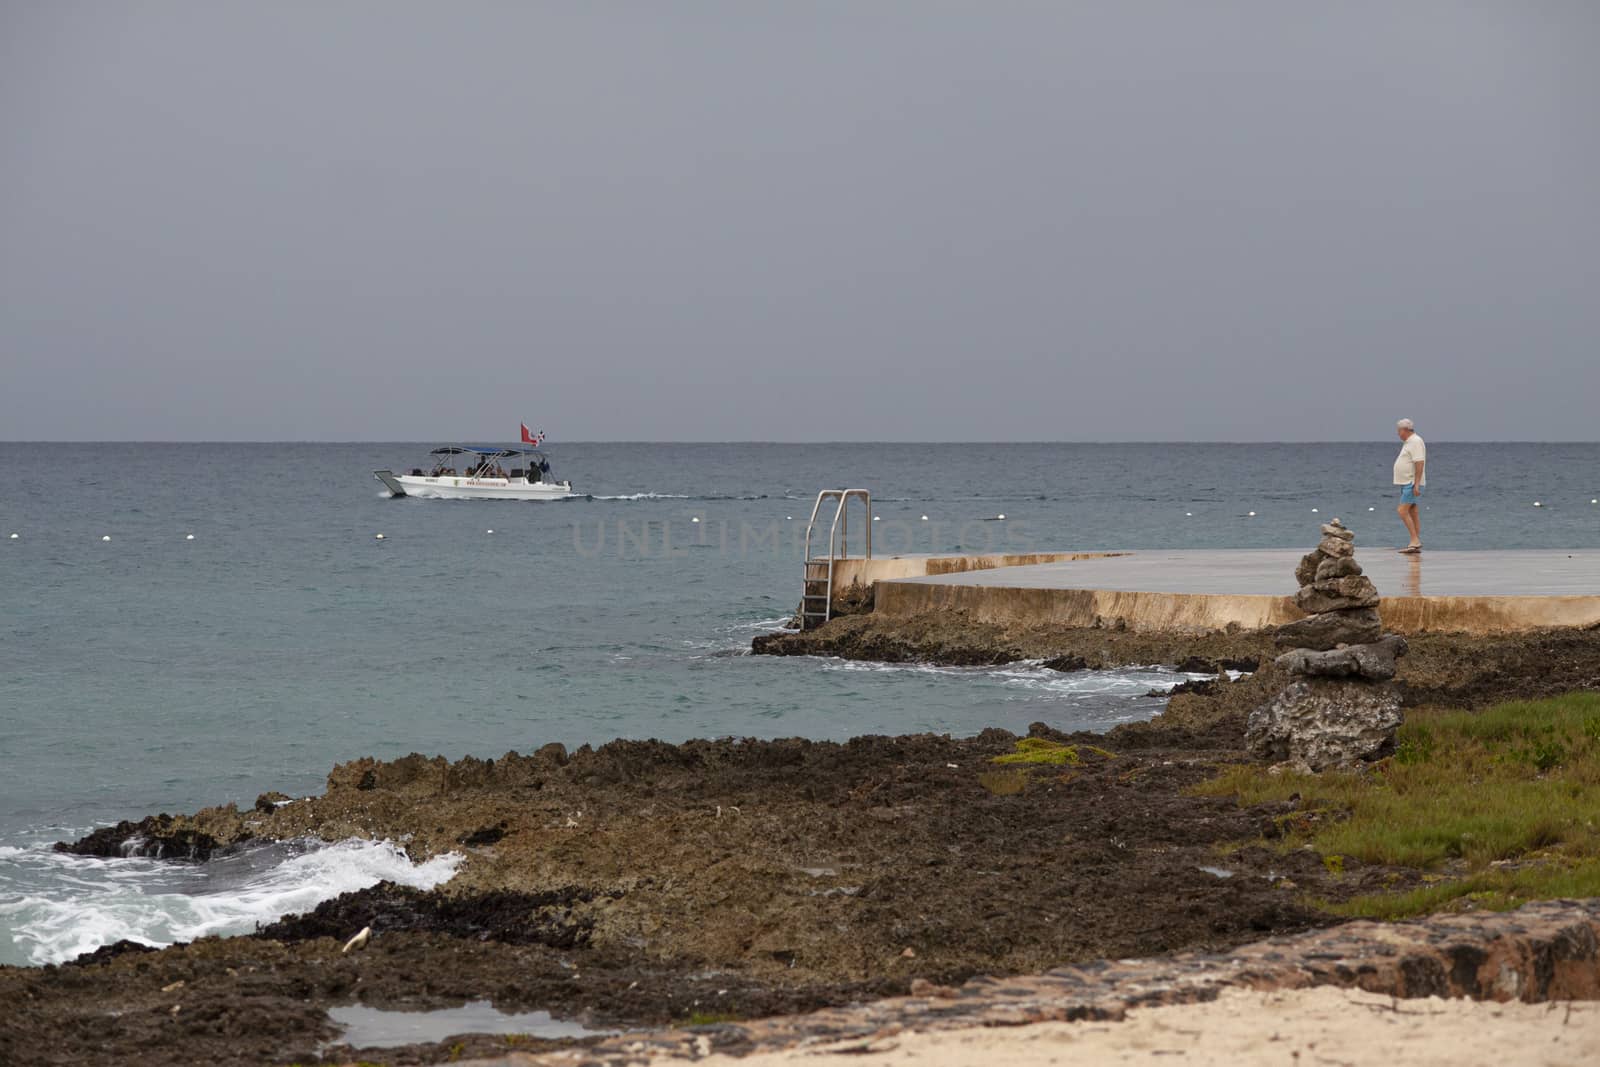 View of the Dominicus coast in the Dominican Republic in a cloudy day